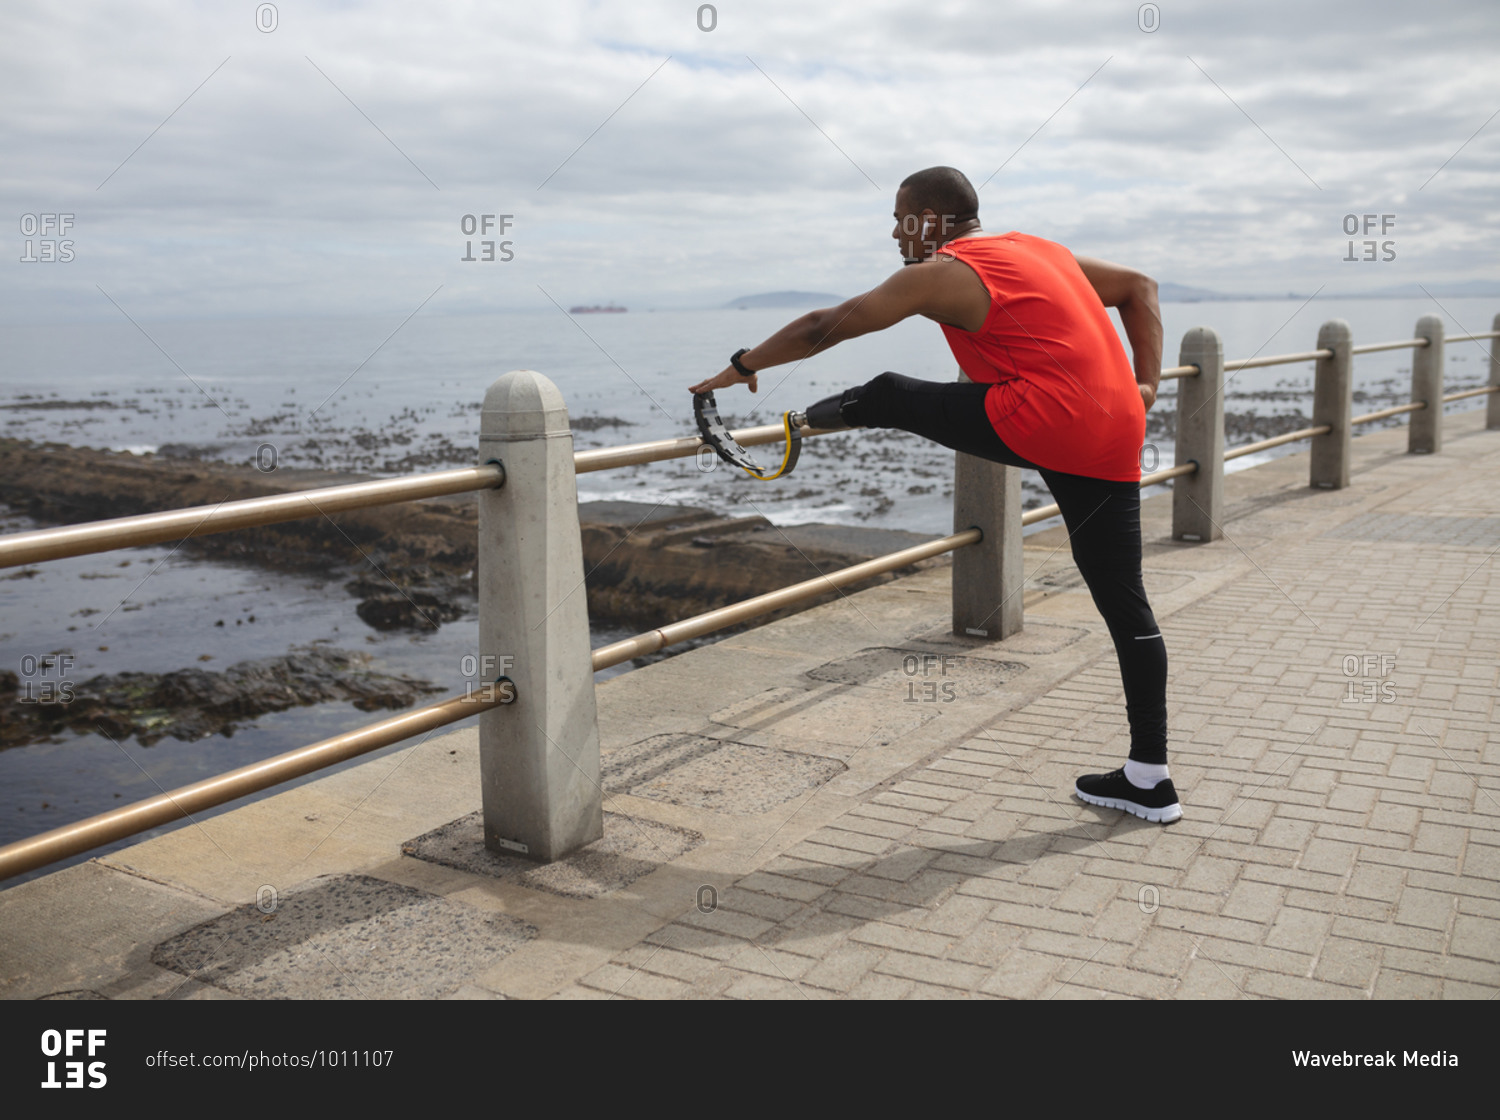 Disabled mixed race man with a prosthetic leg and running blade working out by the coast wearing wireless earphones, stretching legs with his blade on a fence. Fitness disability healthy lifestyle.